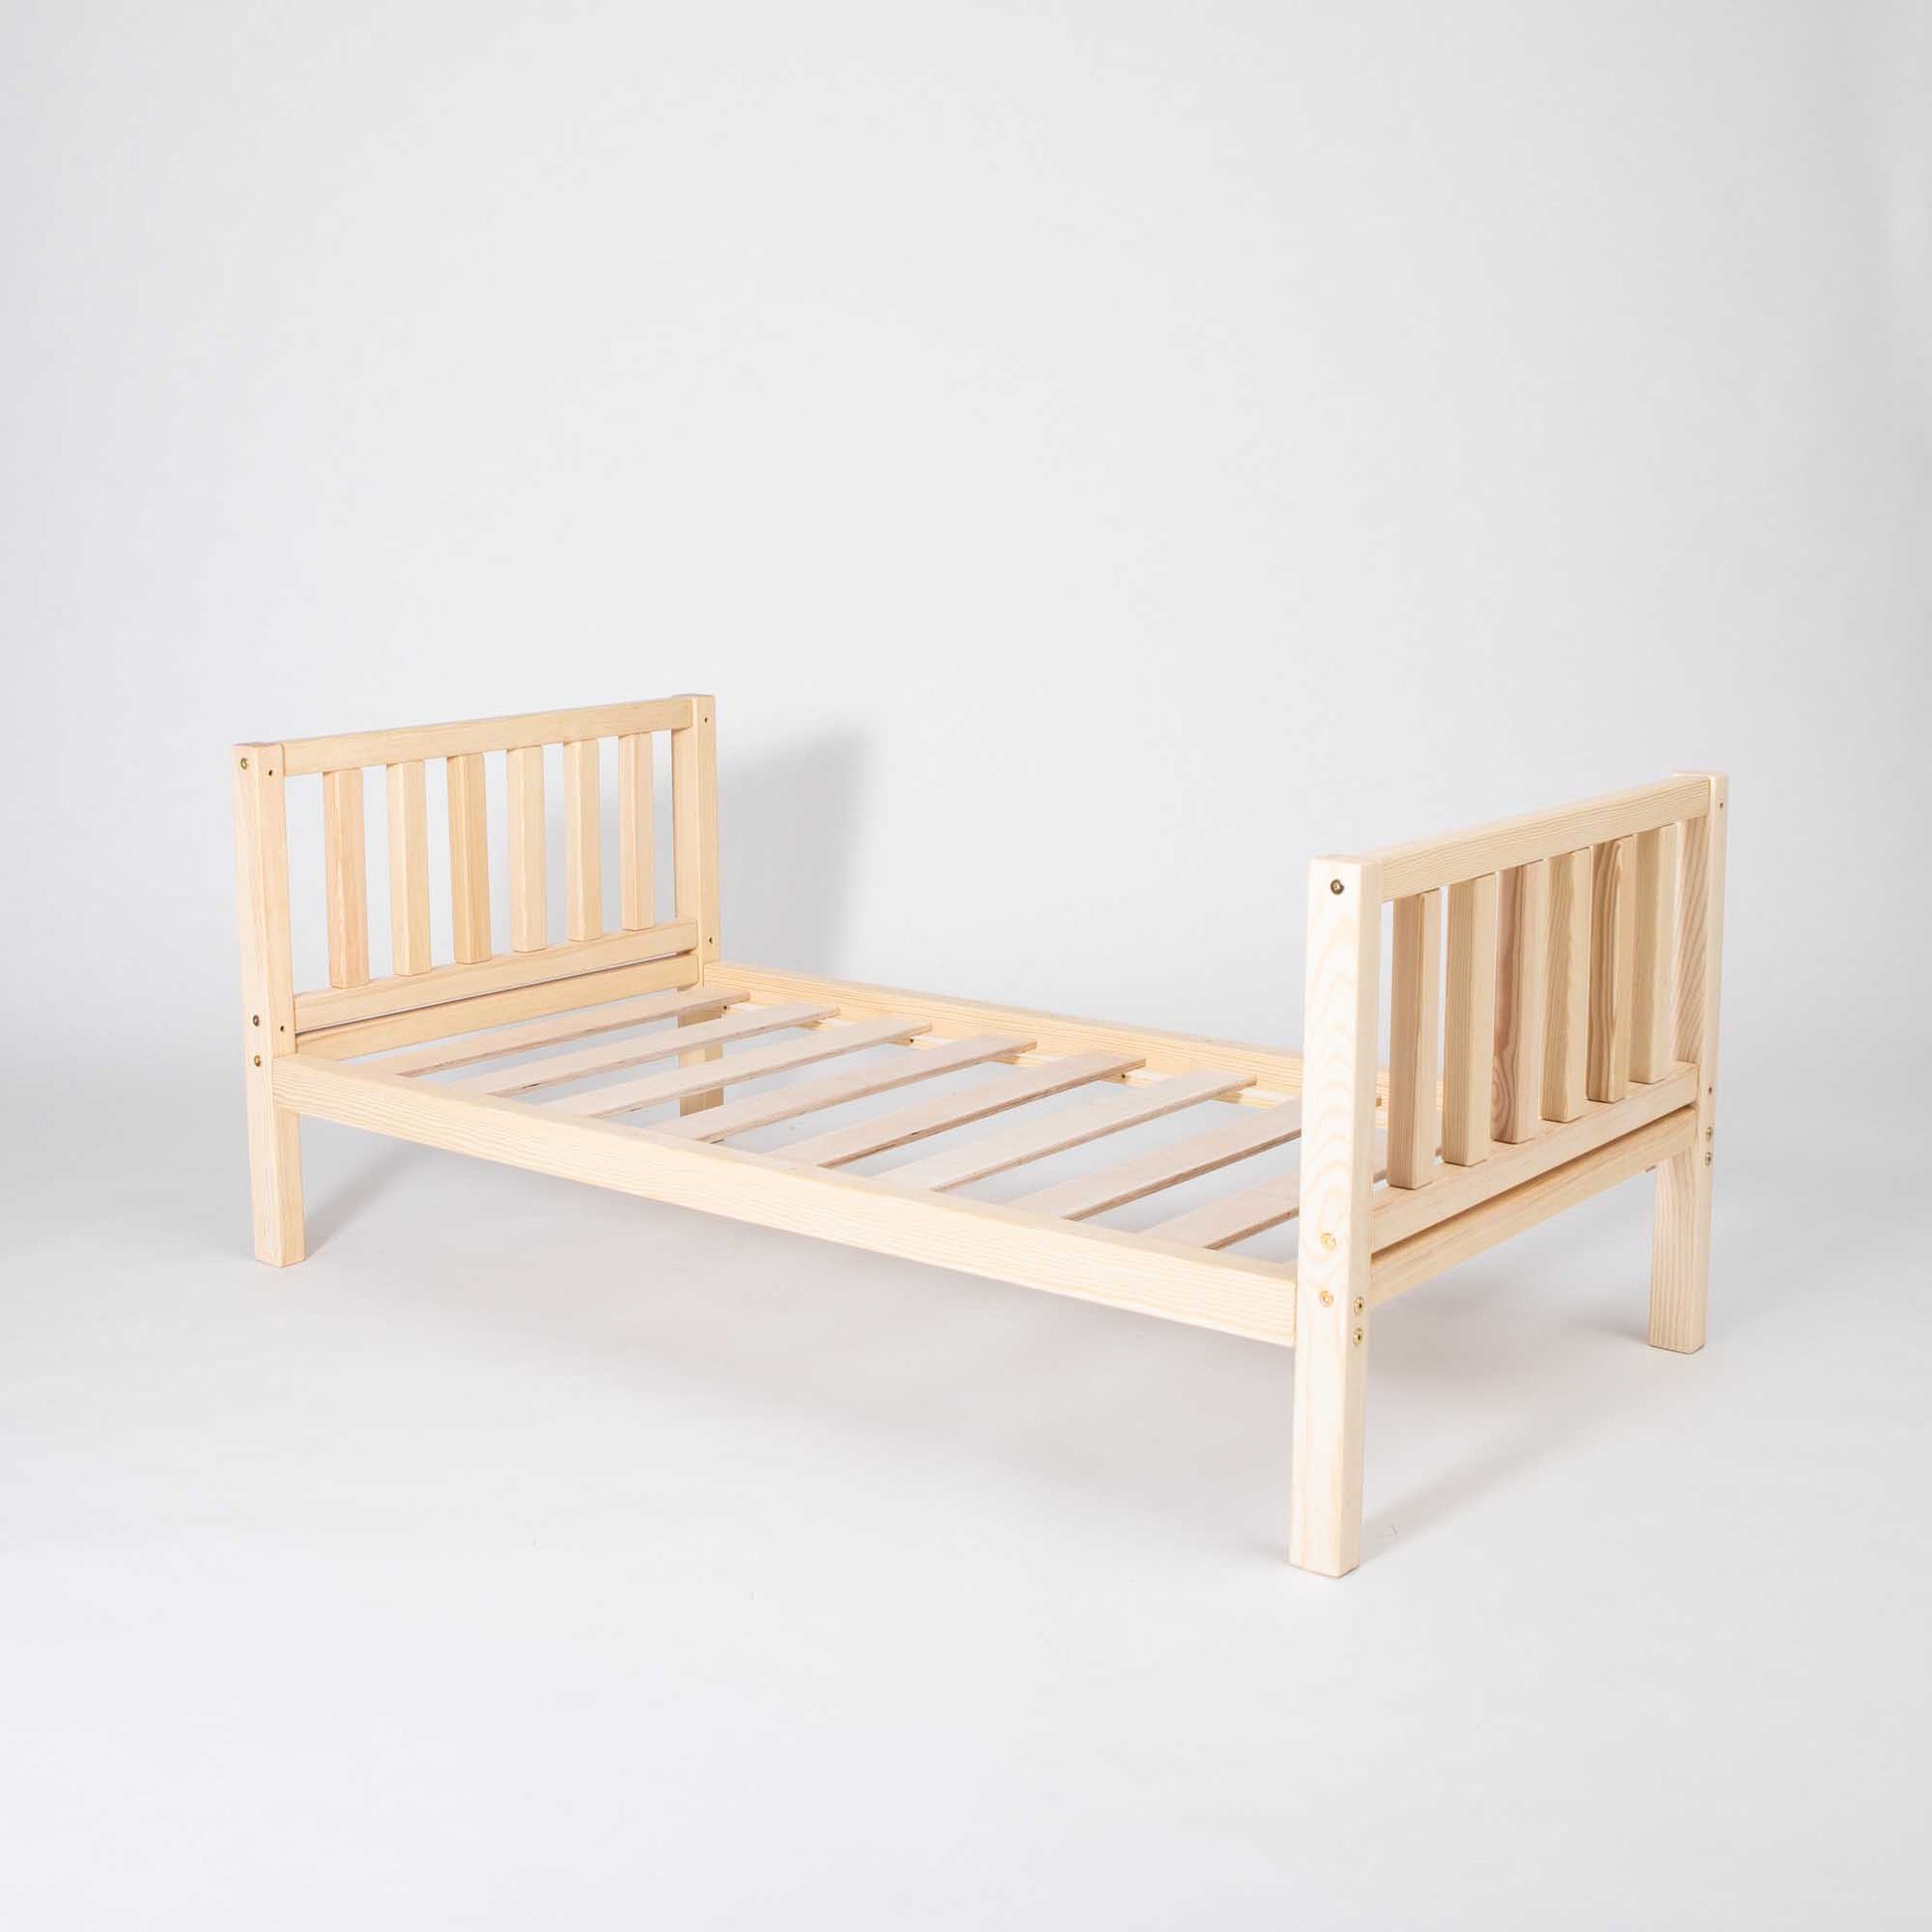 A Sweet Home From Wood raised kids' bed on legs with a headboard and footboard, promoting independence for children.